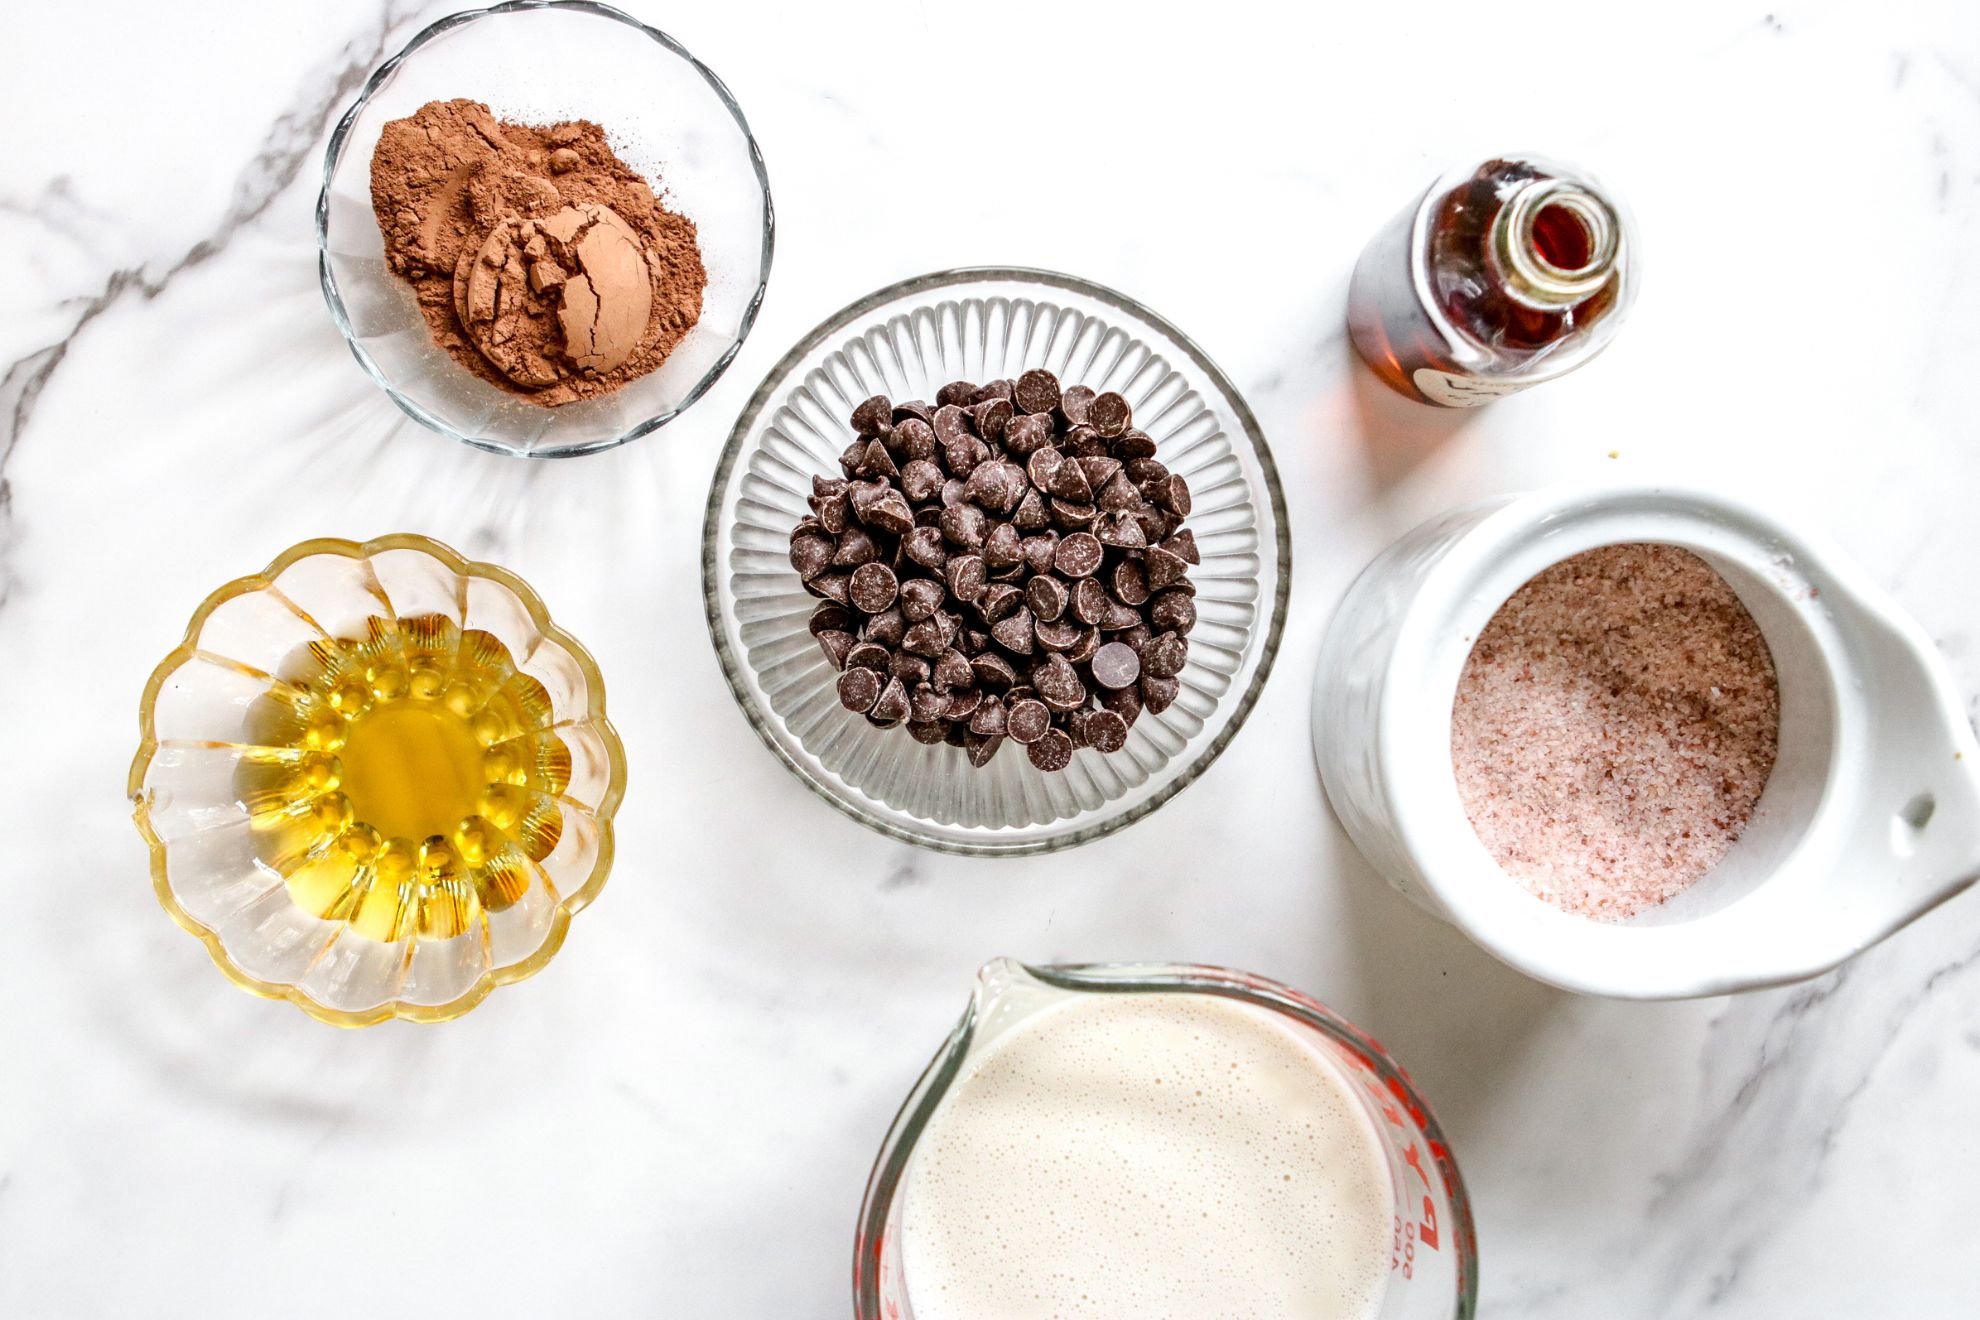 This is an overhead horizontal image of small bowls fitted with ingredients. There is a small bowl of cocoa powder, agave nectar, chocolate chips, a pyrex of oat milk, a small glass jar of vanilla, and a white ceramic container of pink salt.